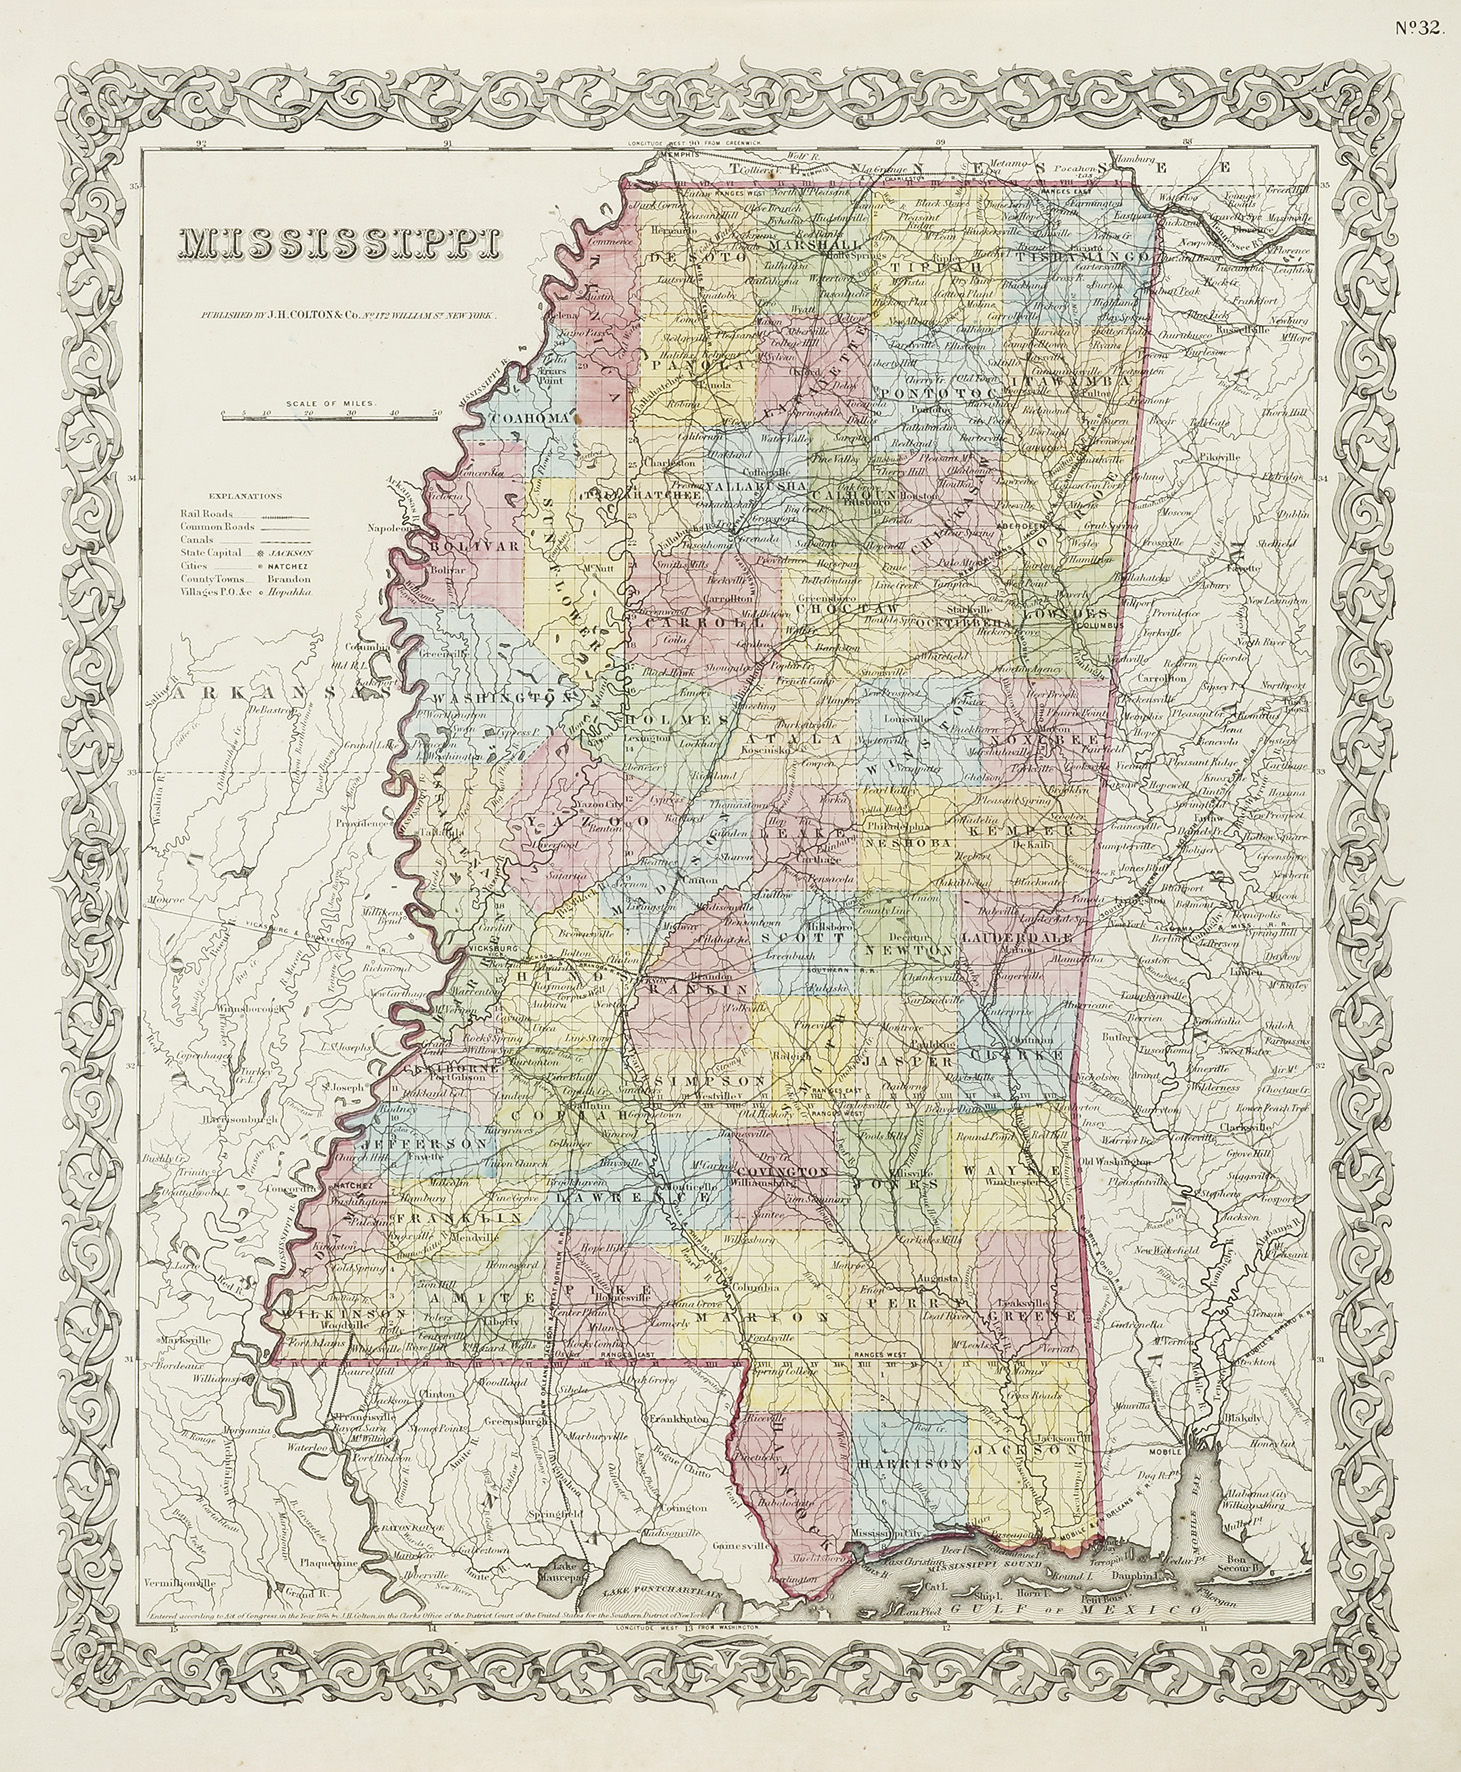 Mississippi. - Antique Print from 1855